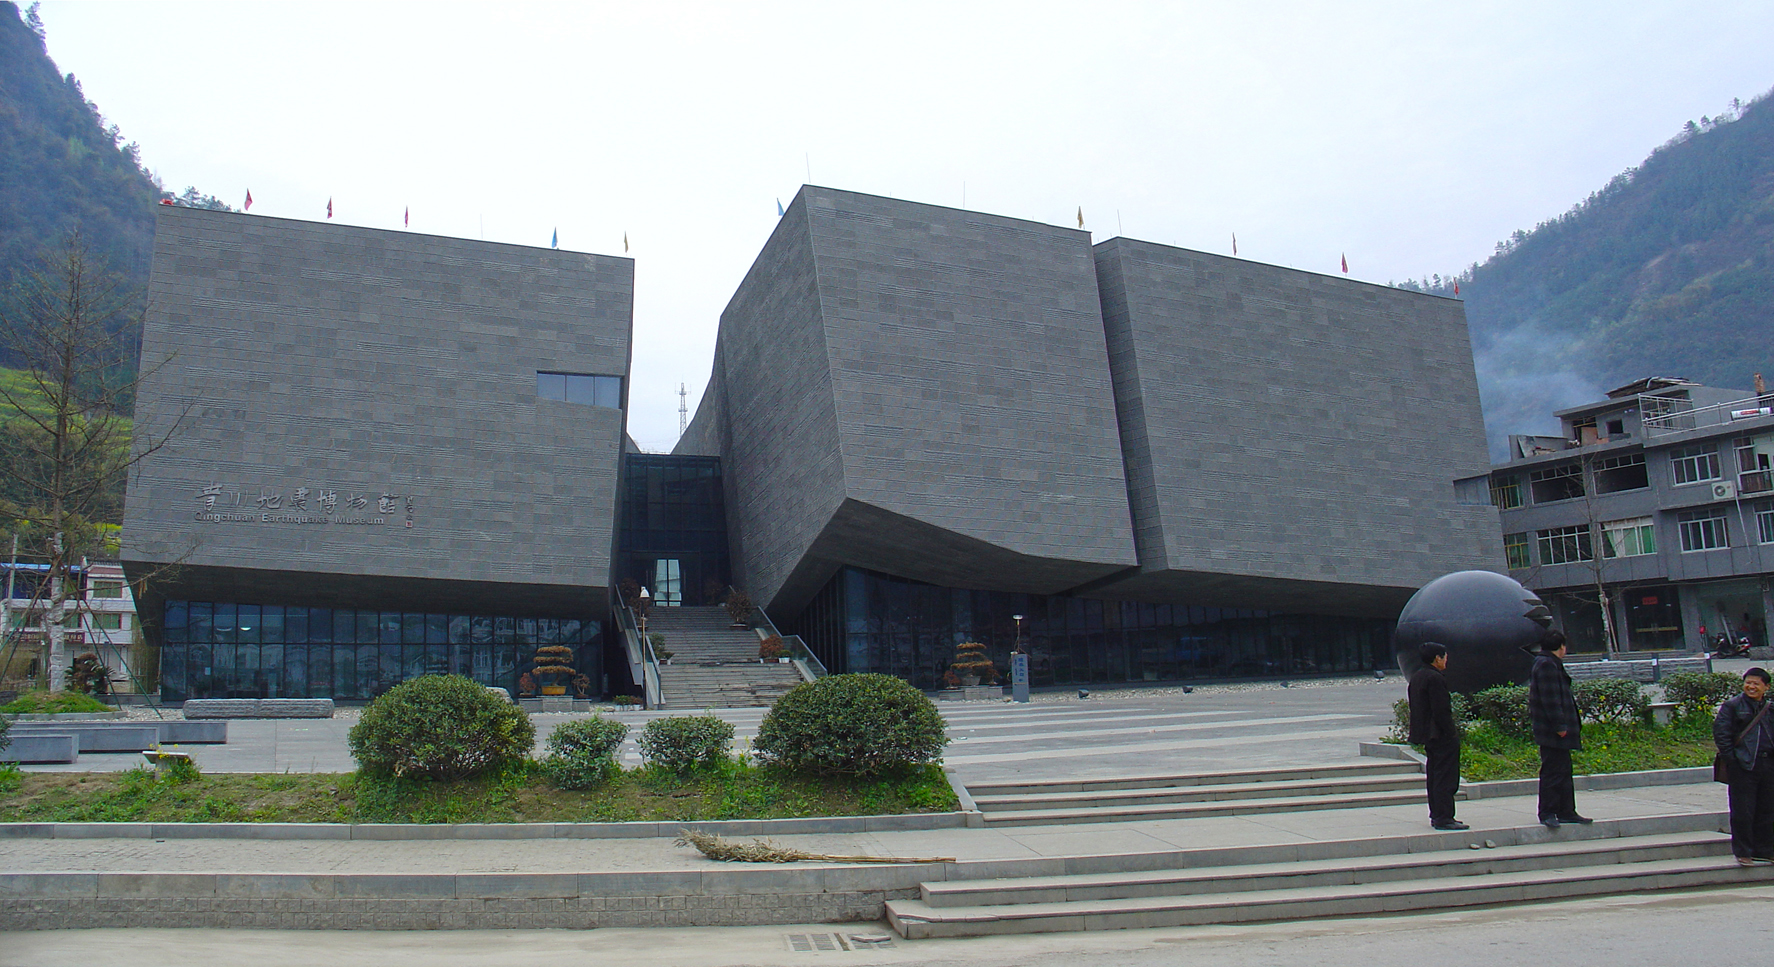 The Qingchuan Earthquake Museum opens on the 12th of May, which is exactly three years after the earthquake happened. We wanted to visit it, but it was not opened yet.